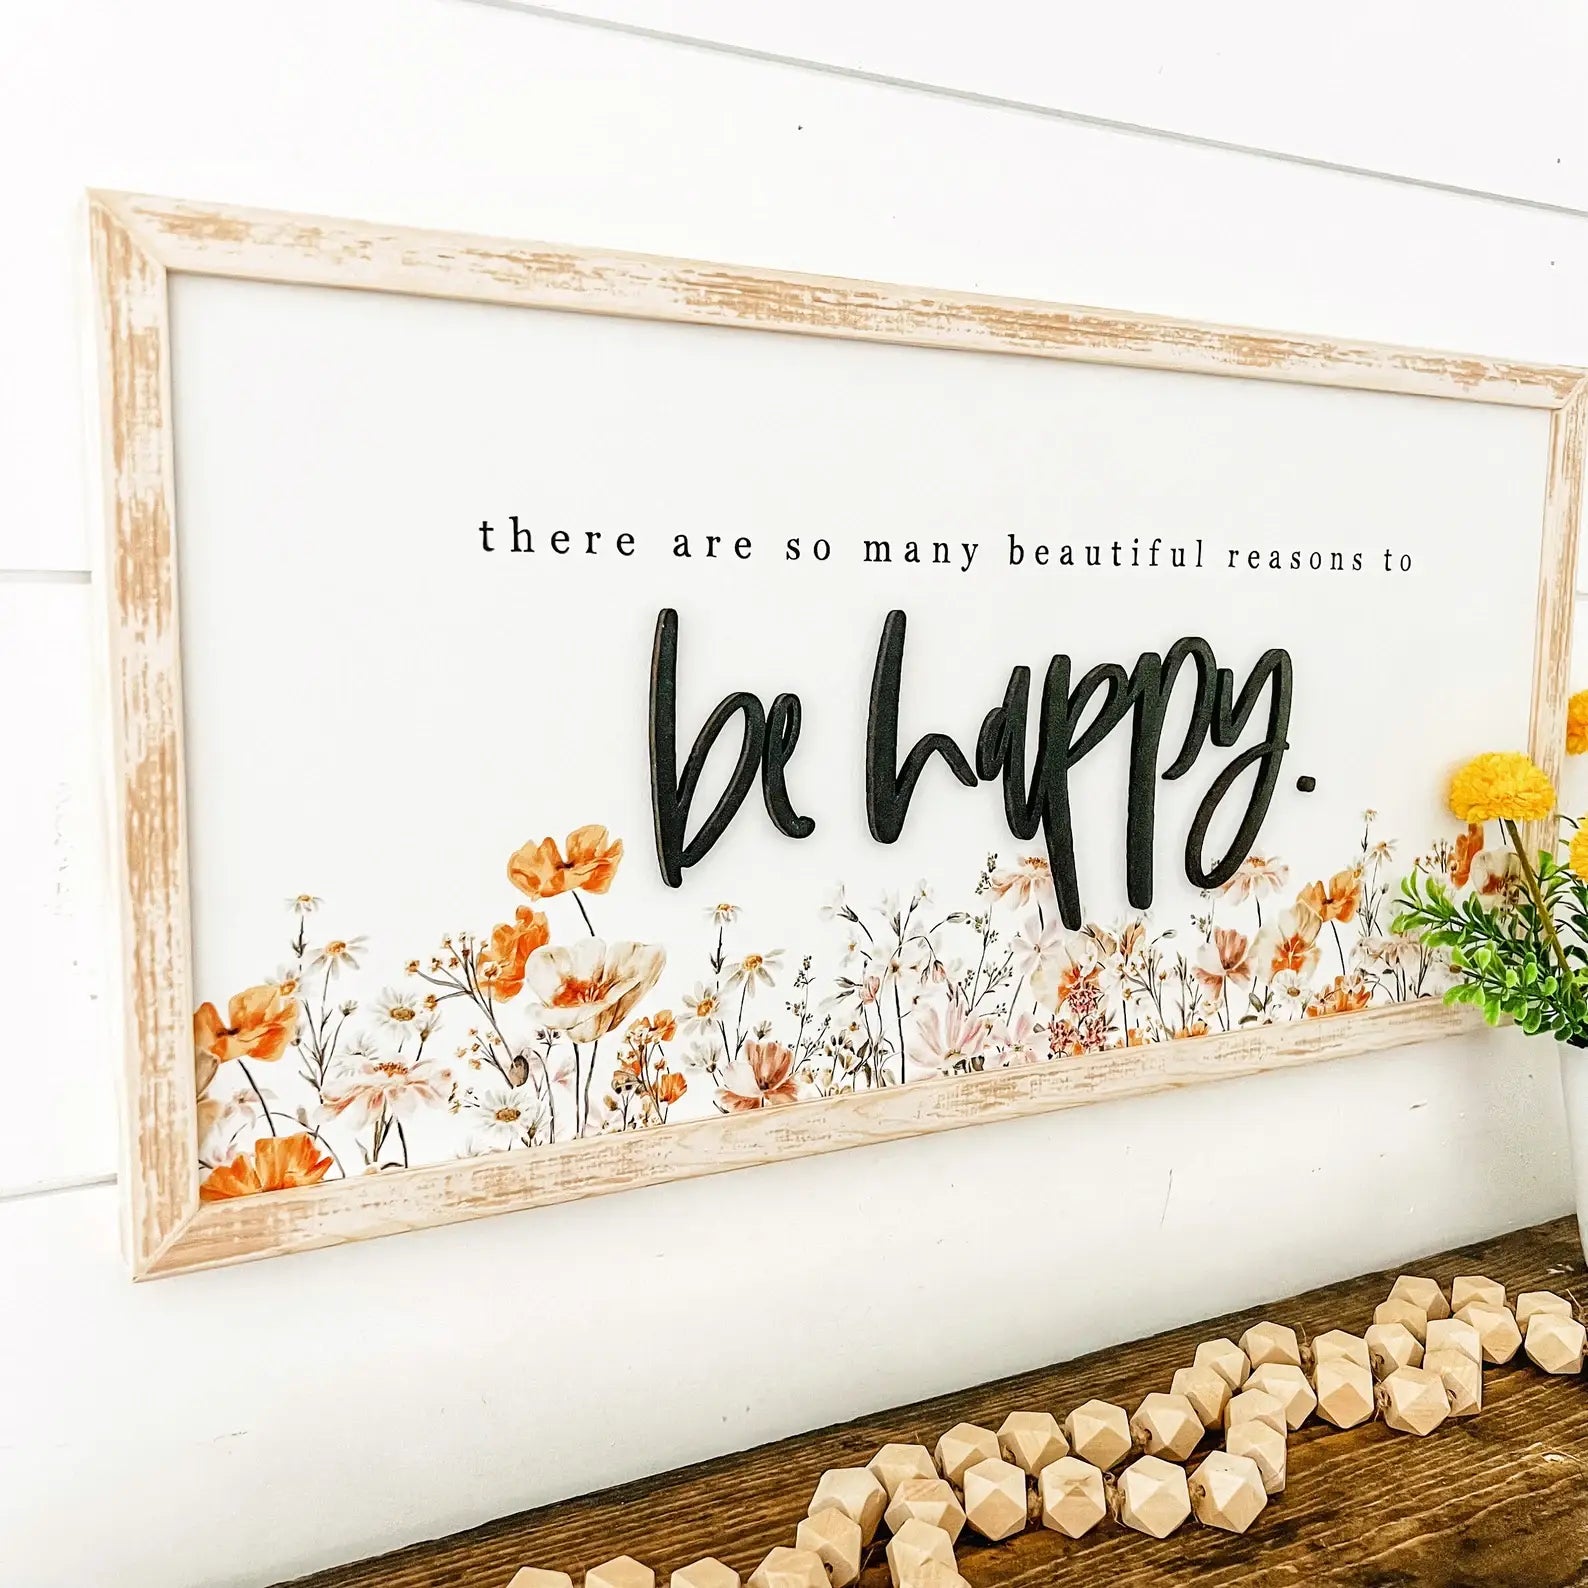 Be Happy Wildflower Wood Sign White Distress Frame White Distress Frame  decor WillowBee Signs & Designs- Tilden Co.